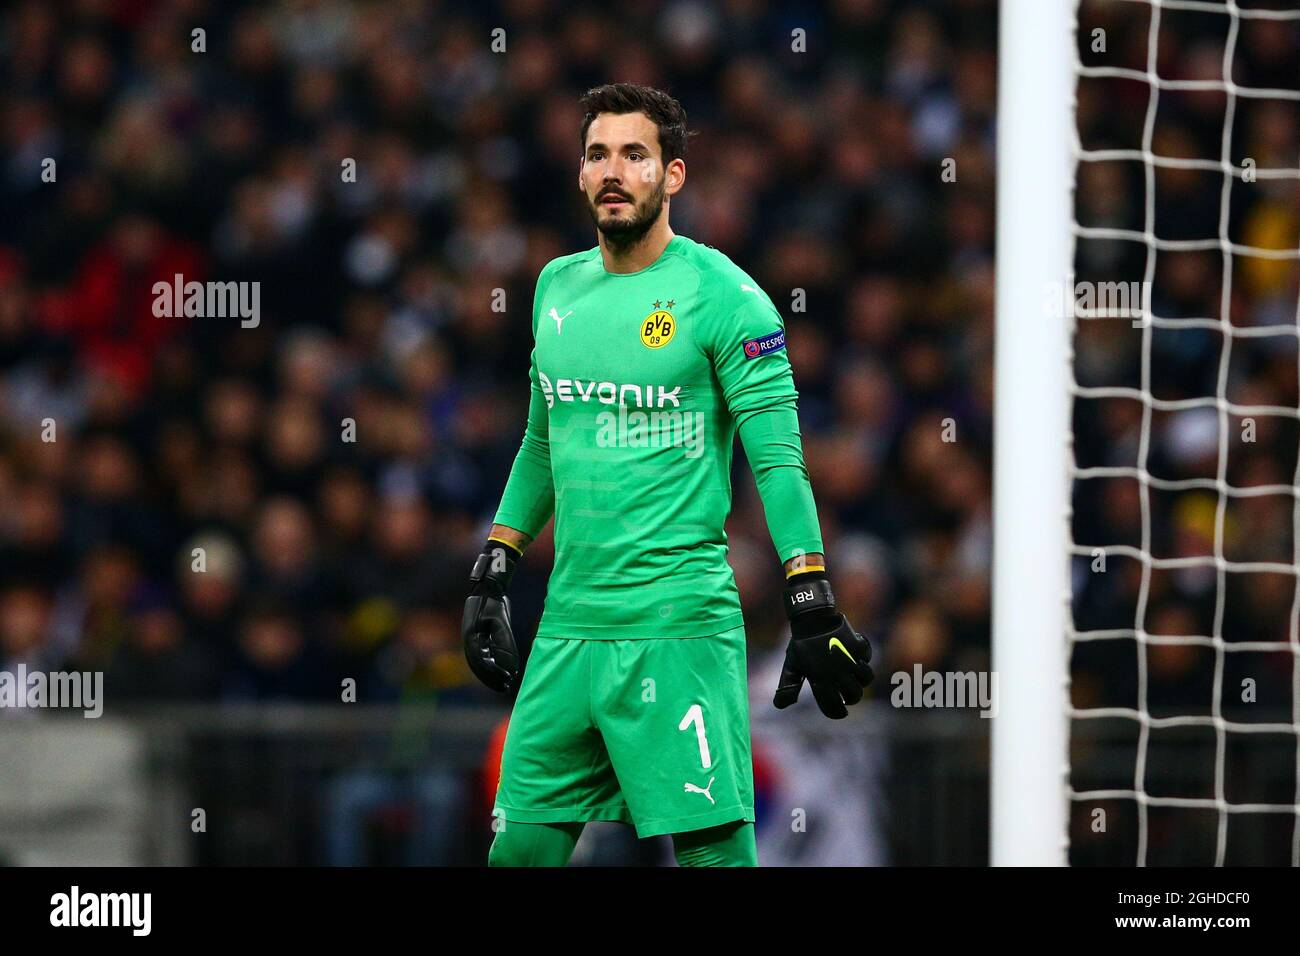 Roman Burki of Borussia Dortmund during the UEFA Champions League Round of 16 First Leg match at Wembley Stadium, London. Picture date: 13th February 2019. Picture credit should read: Craig Mercer/Sportimage via PA Images Stock Photo